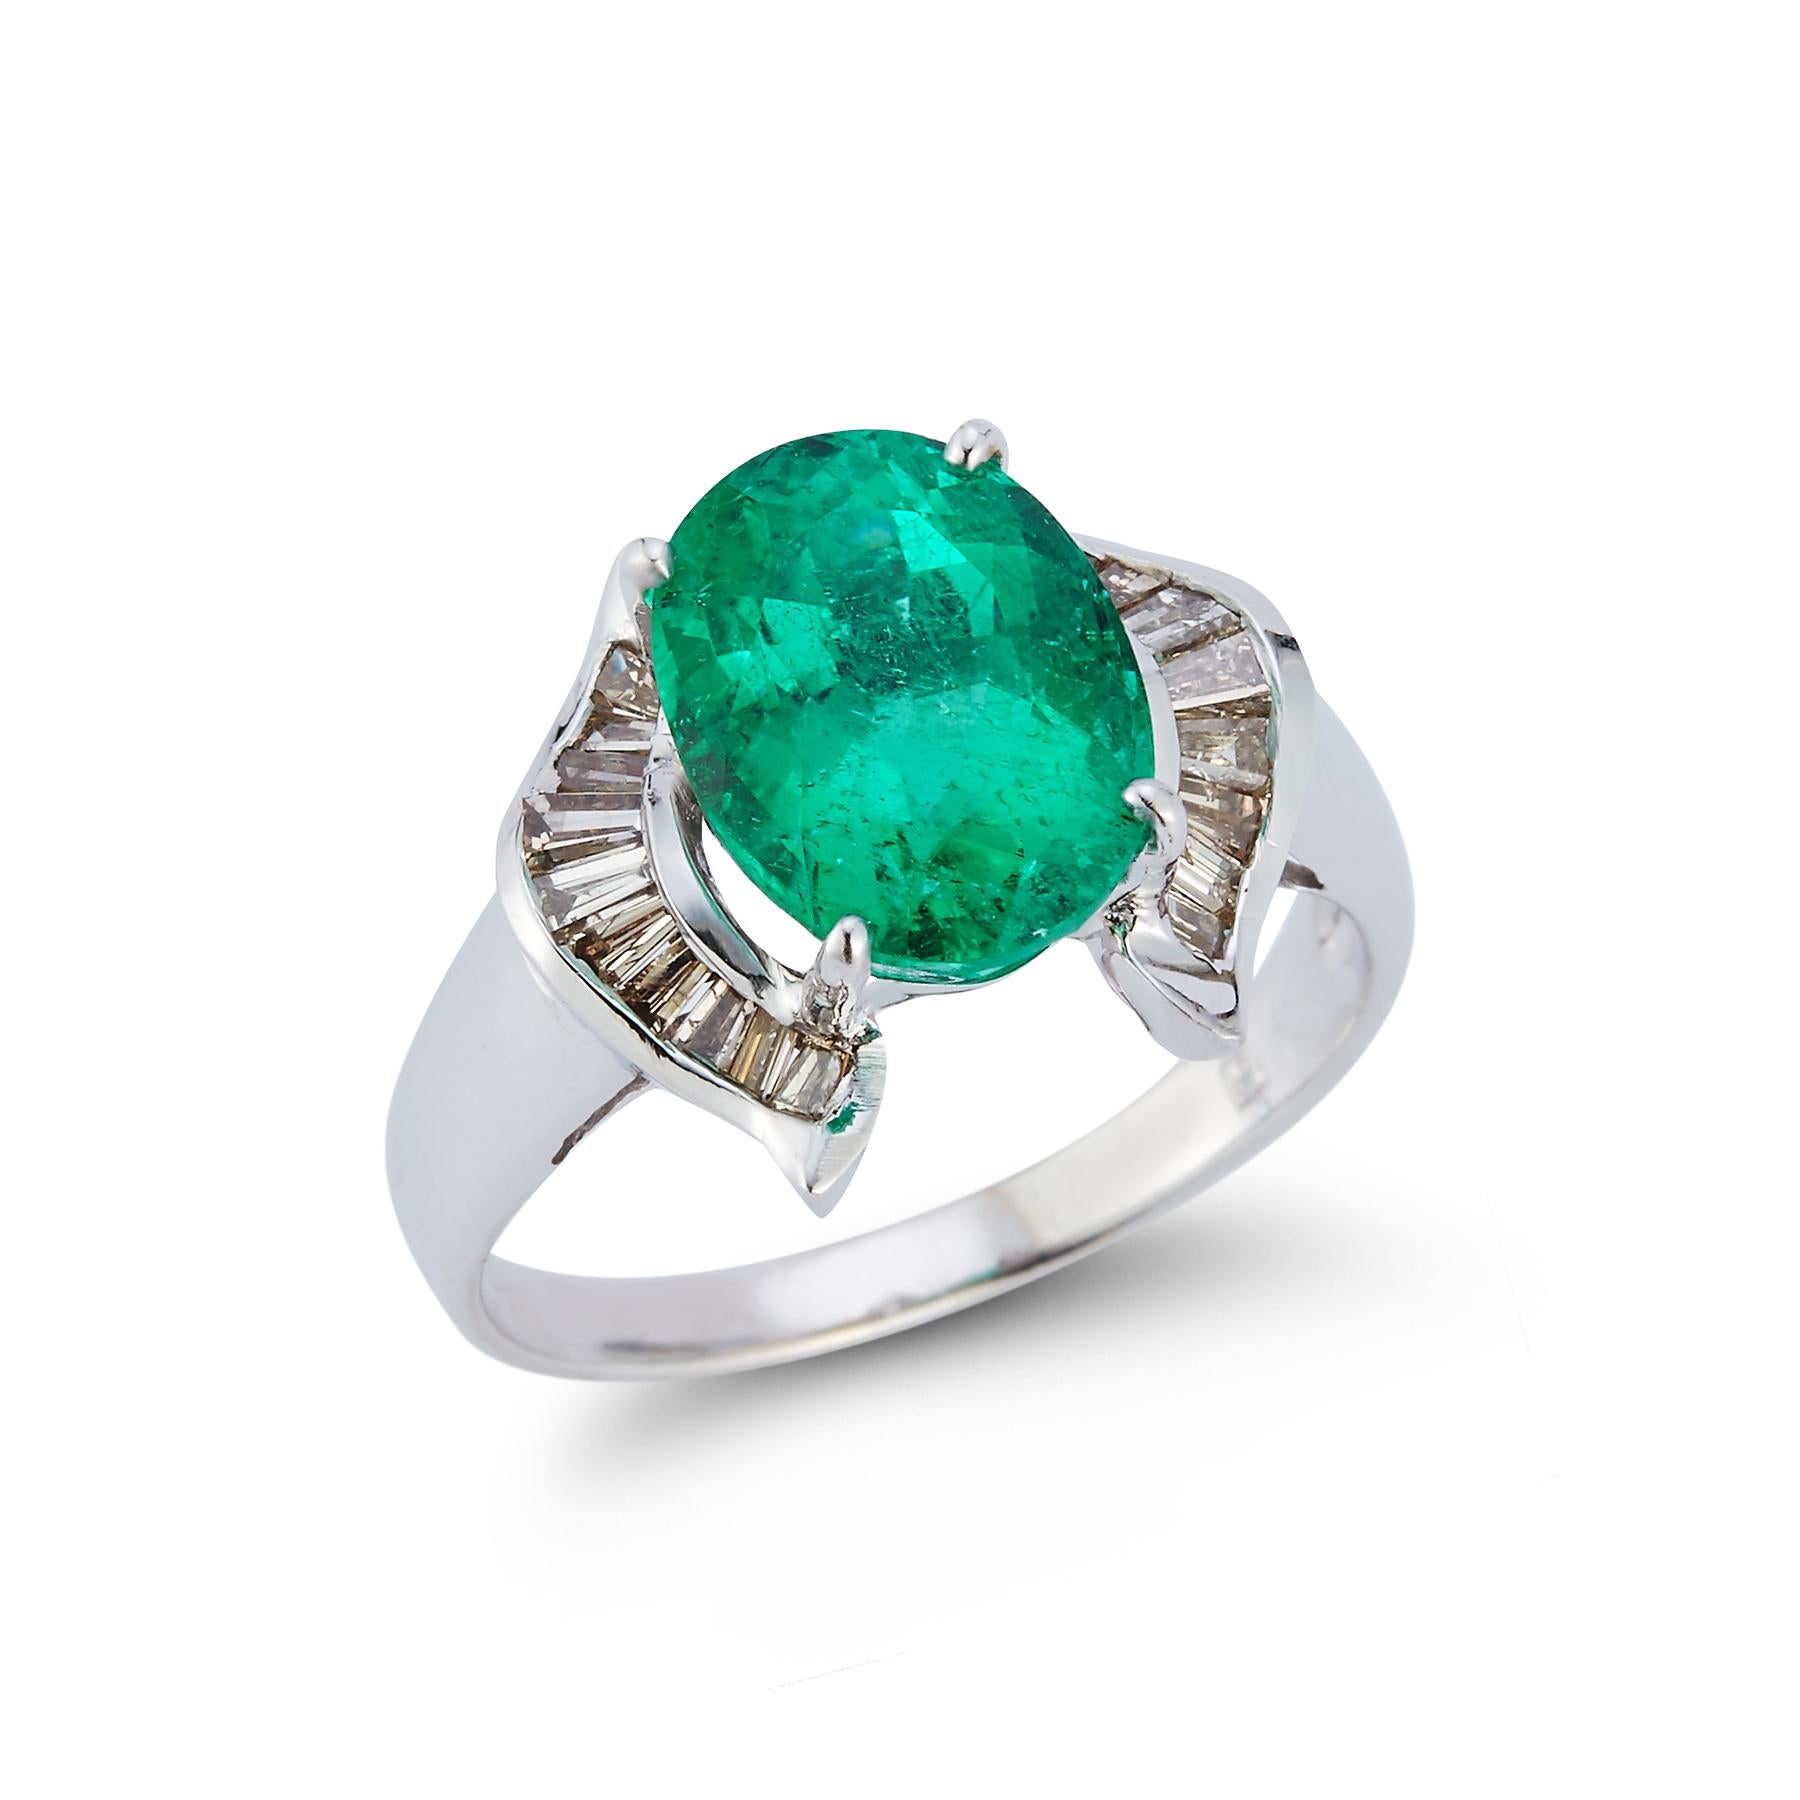 Certified Emerald & Diamond Ring, one oval cut emerald set in 4 prongs surrounded by baguette diamonds all set in 18k white gold.

Emerald Weight: 4.17 Cts

Ring Size: 7.5

Re sizable to any size free of charge




